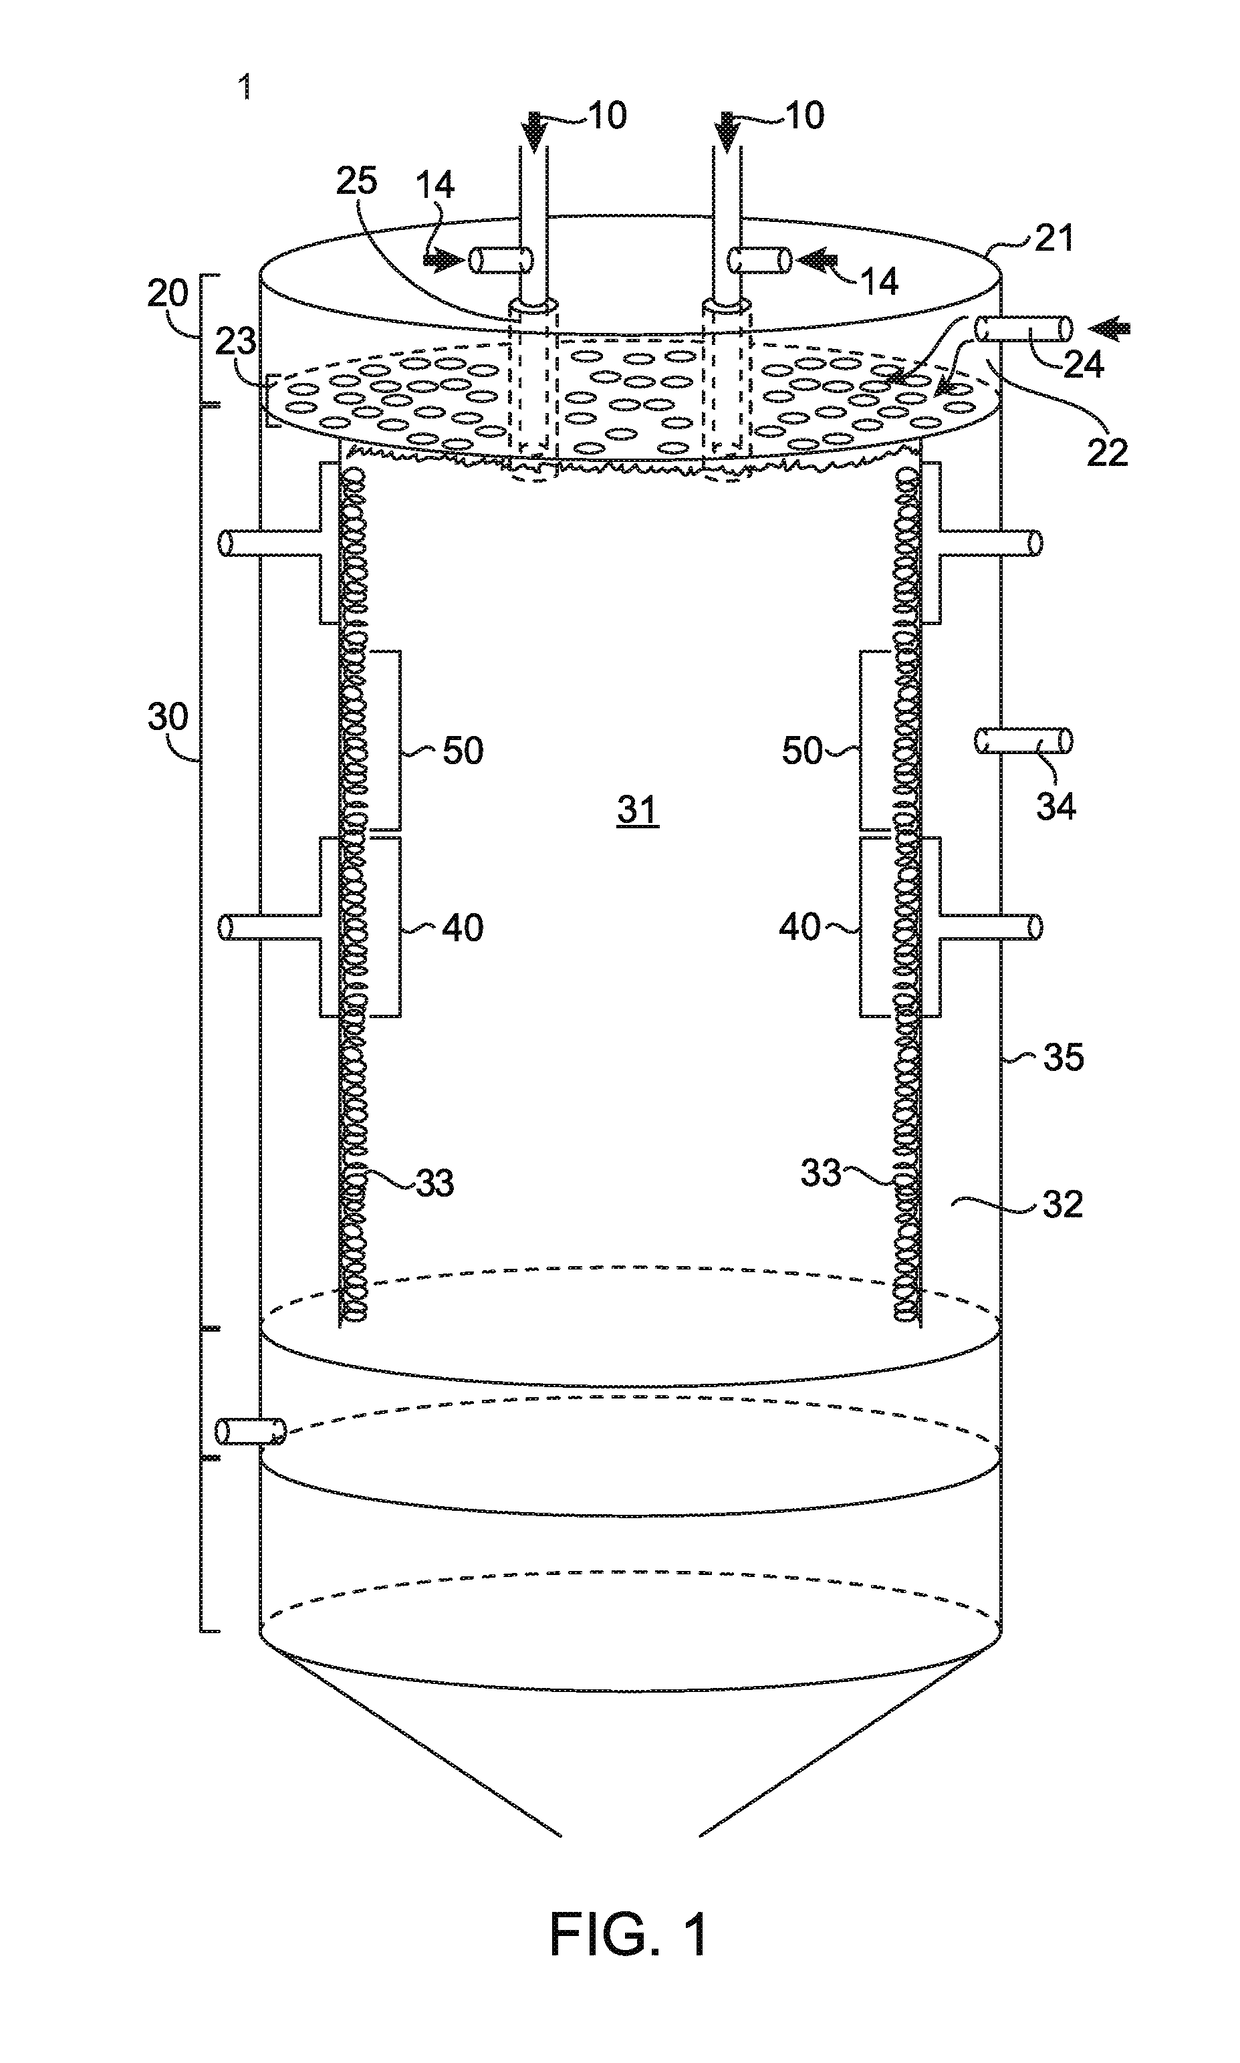 Systems and methods for improved waste gas abatement